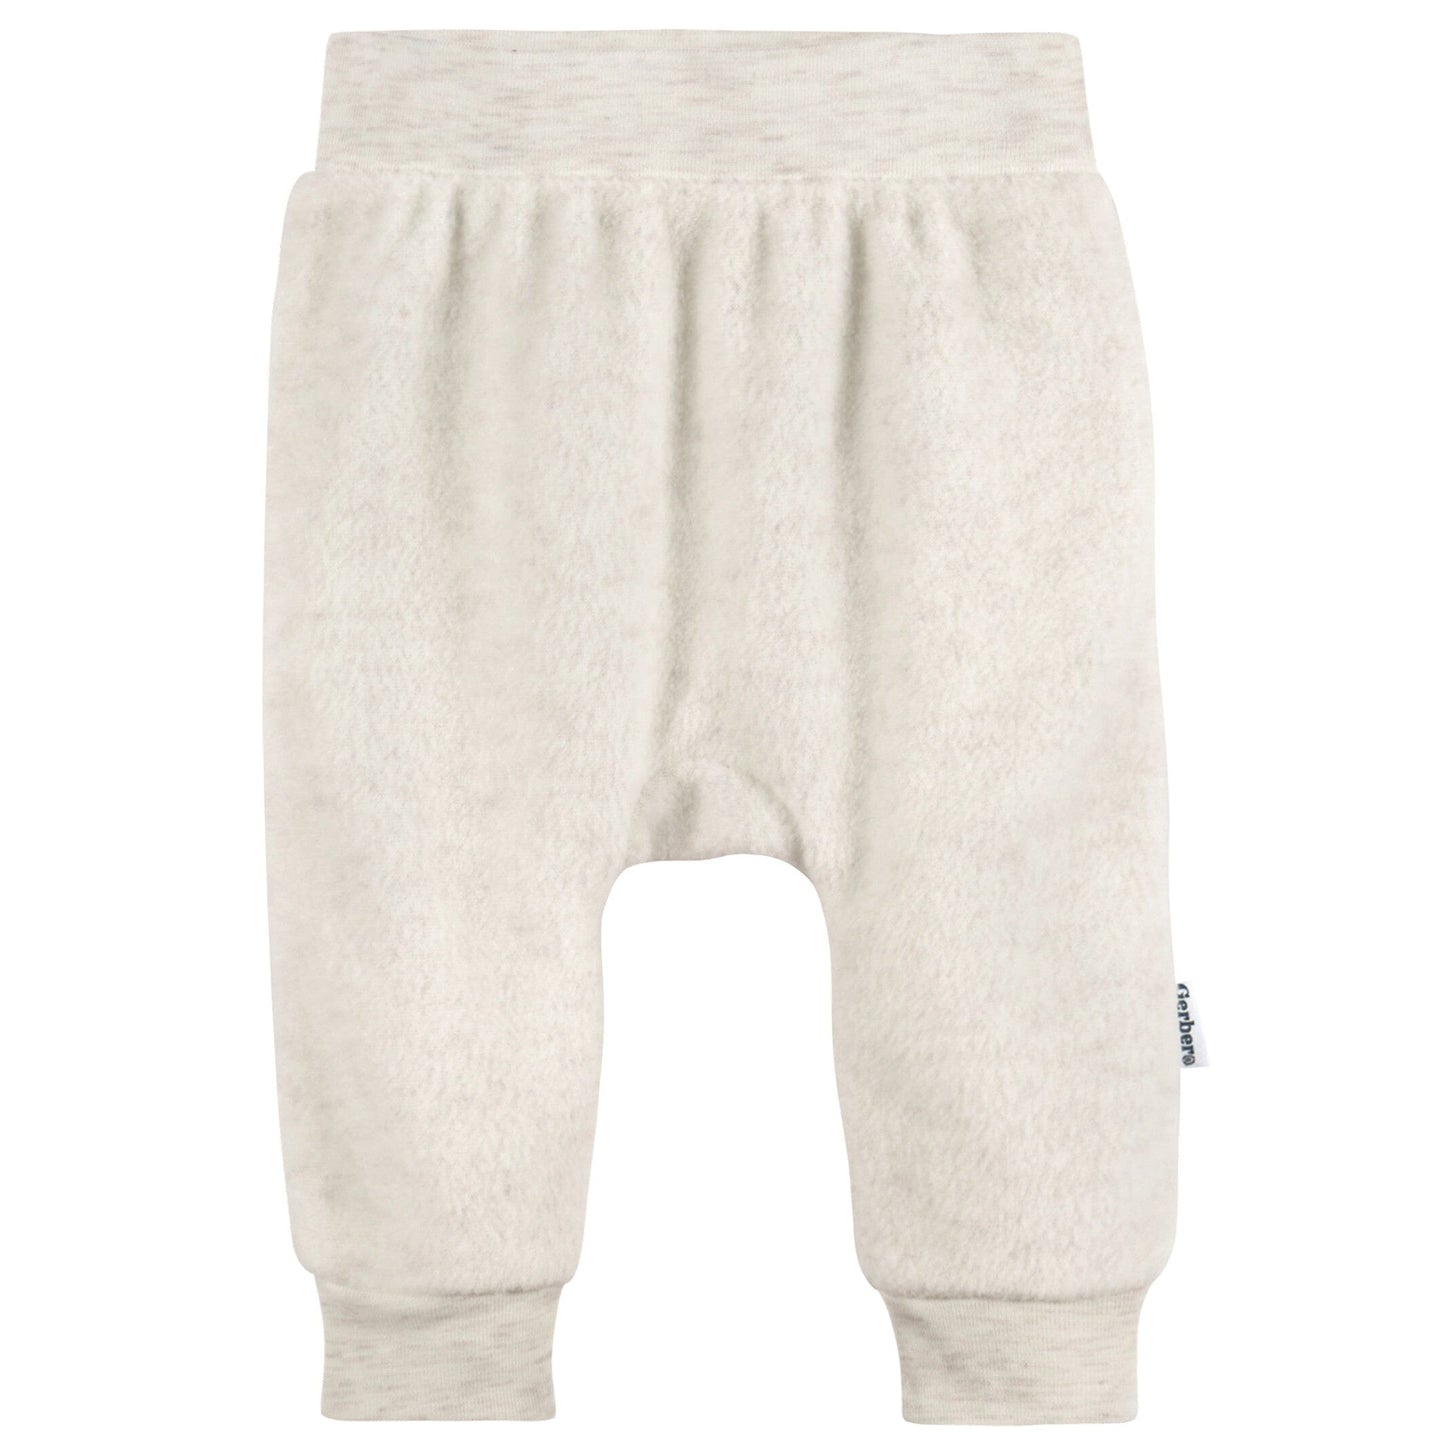 4-Pack Baby Neutral Oatmeal Heather and Stripes Fleece Pants